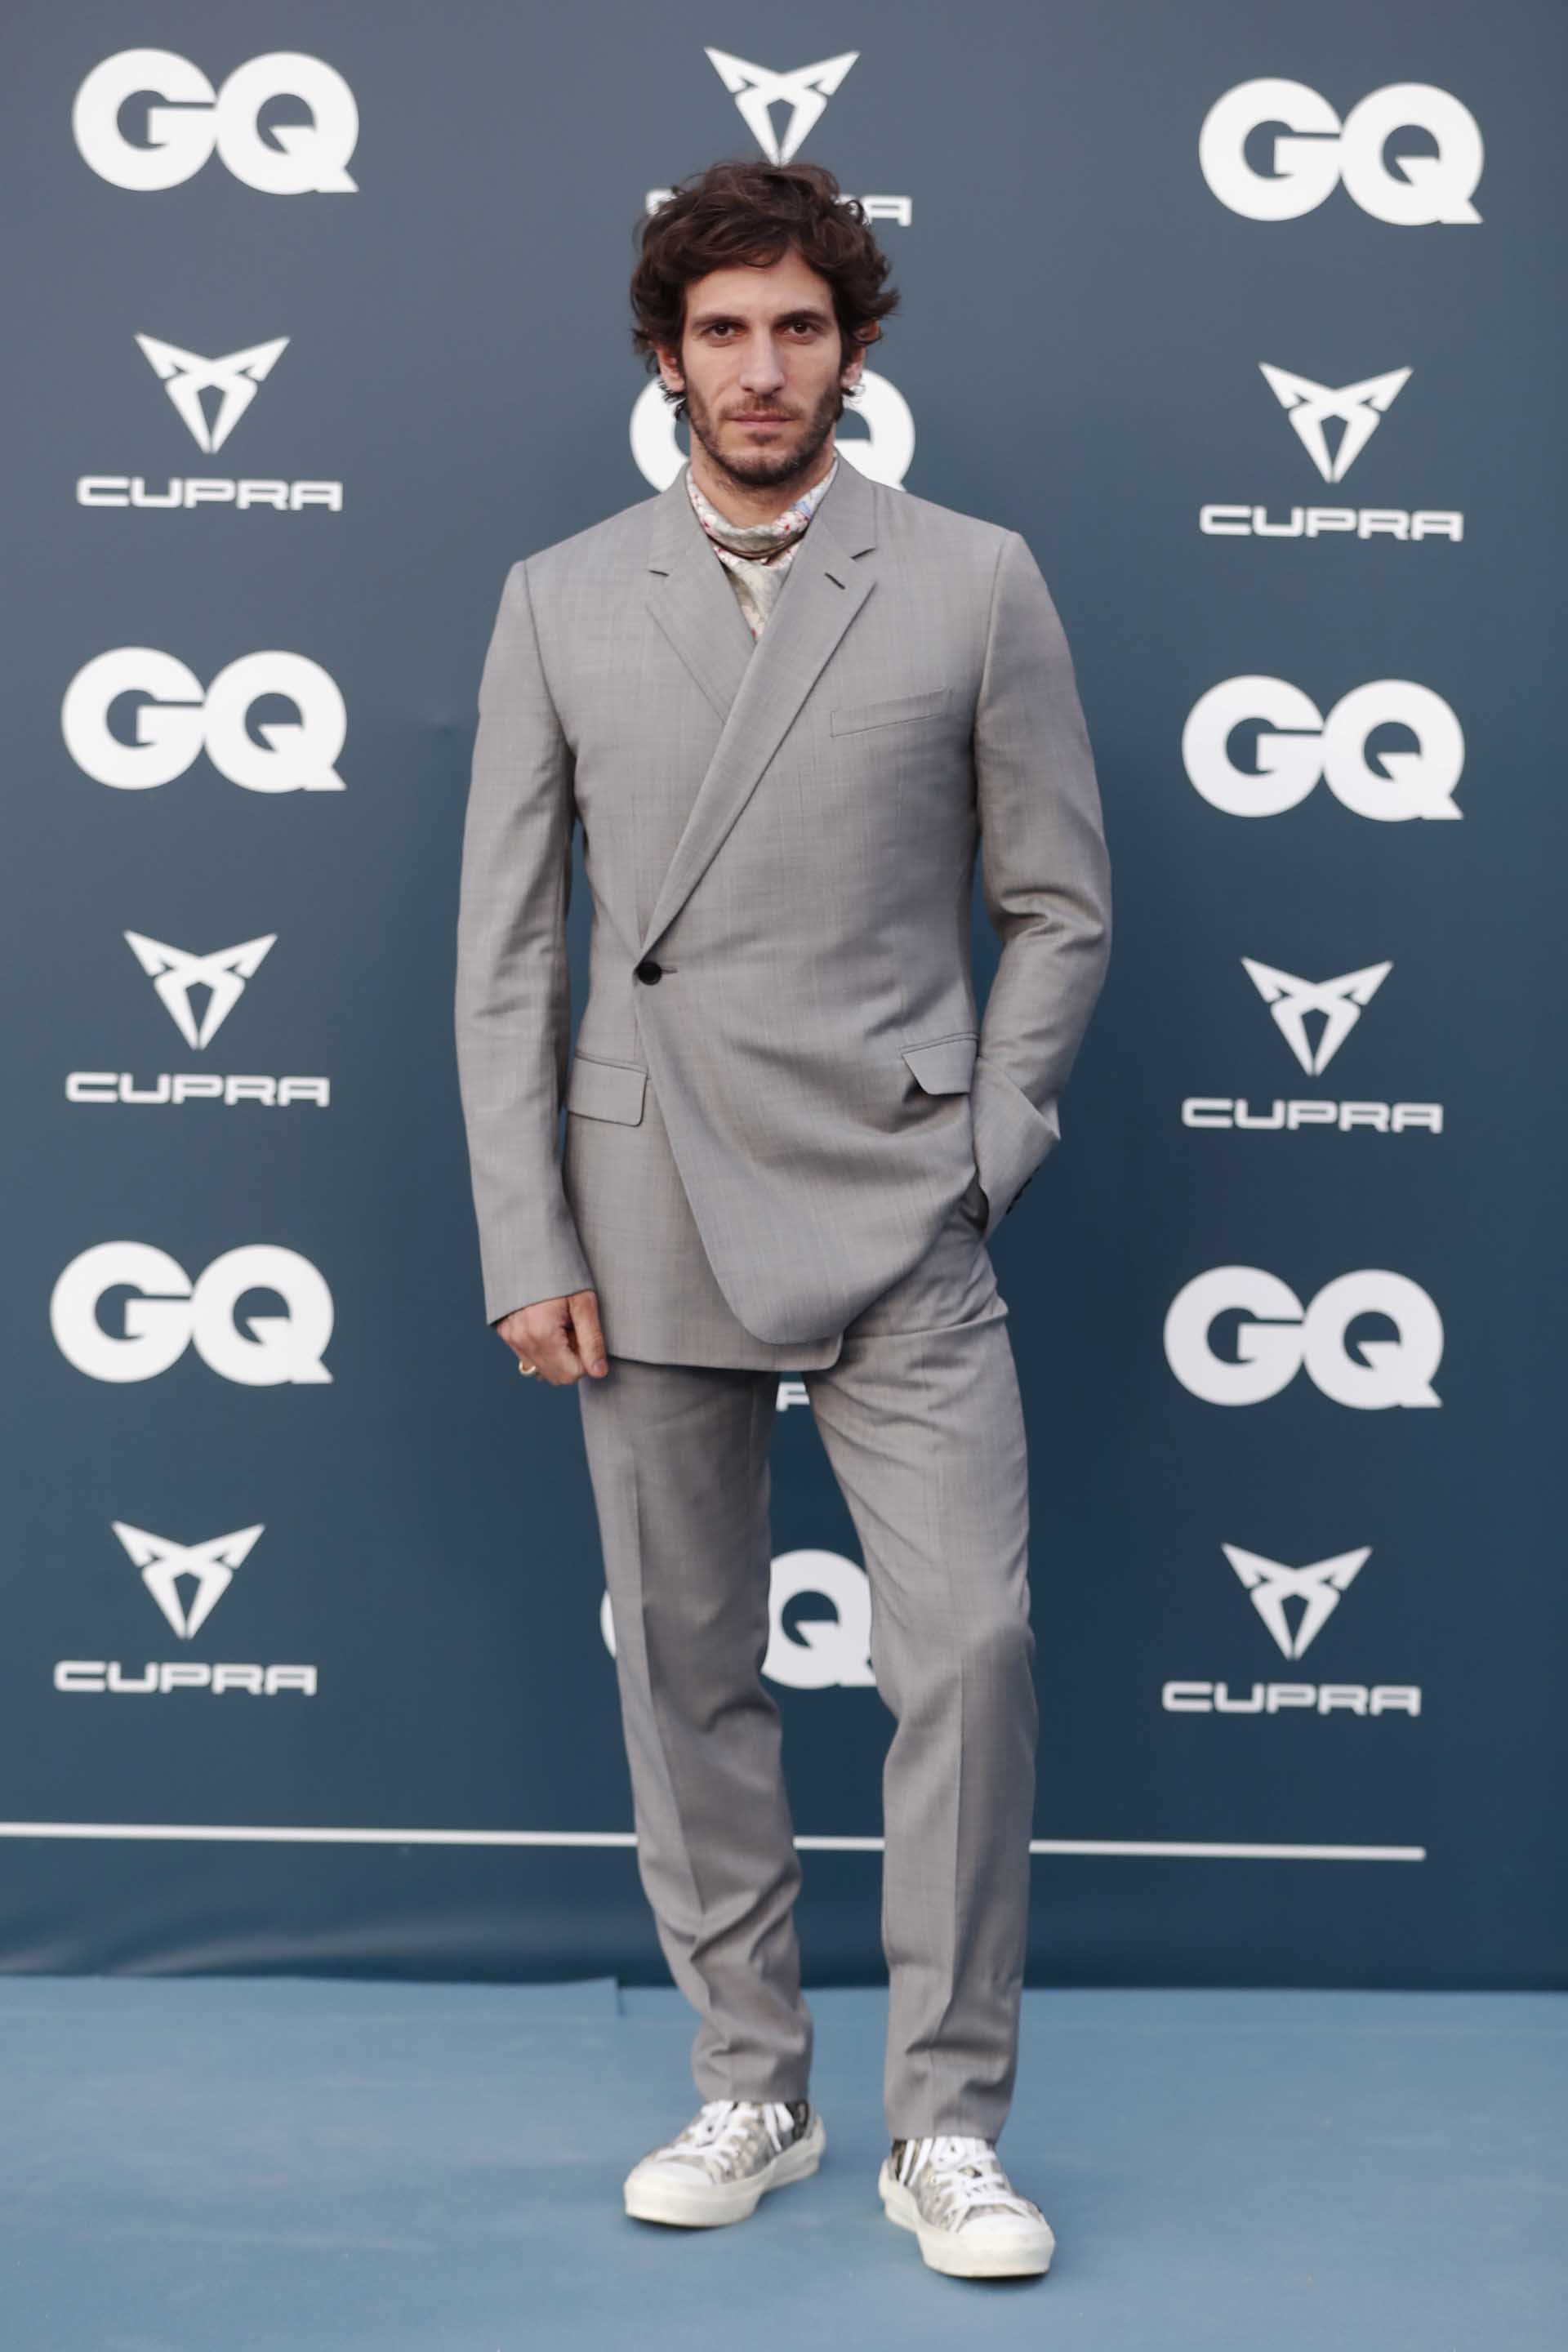 Actor Quim Gutierrez during the celebration for the 25th Anniversary of the magazine GQ Spain in Madrid on Tuesday 09 July 2019.